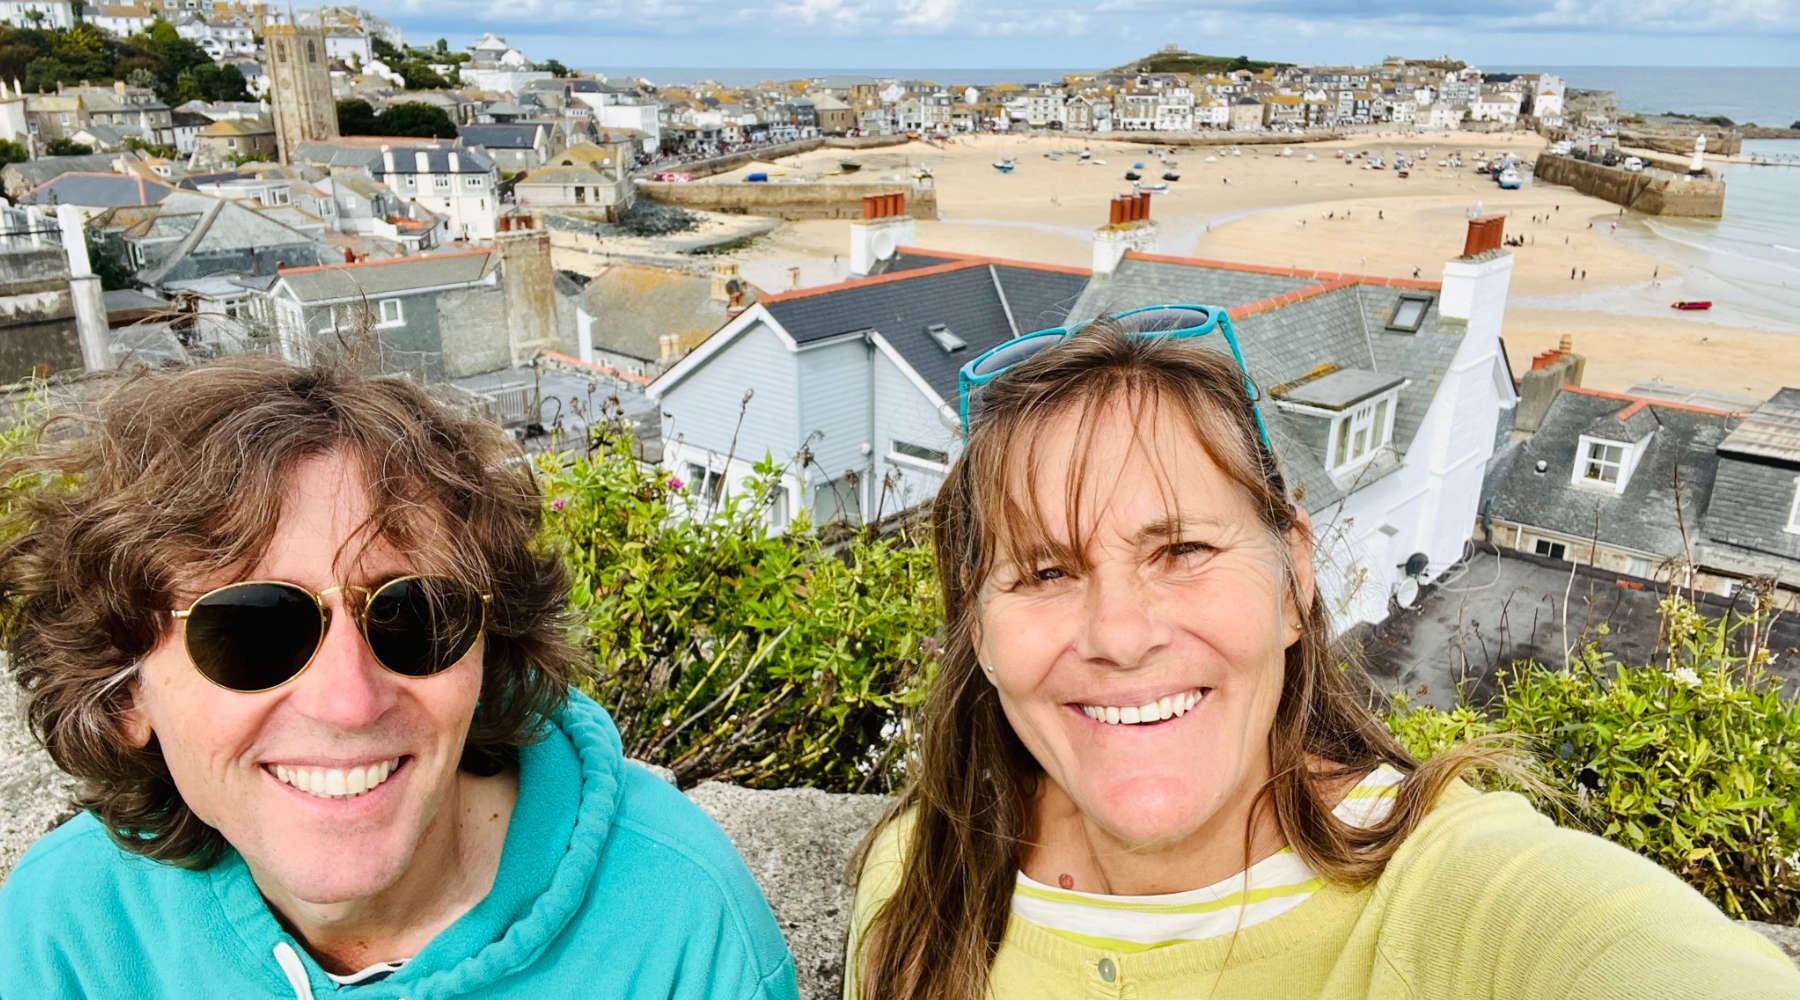 St Ives artists John Dyer and Joanne Short with the town of St Ives in Cornwall behind them